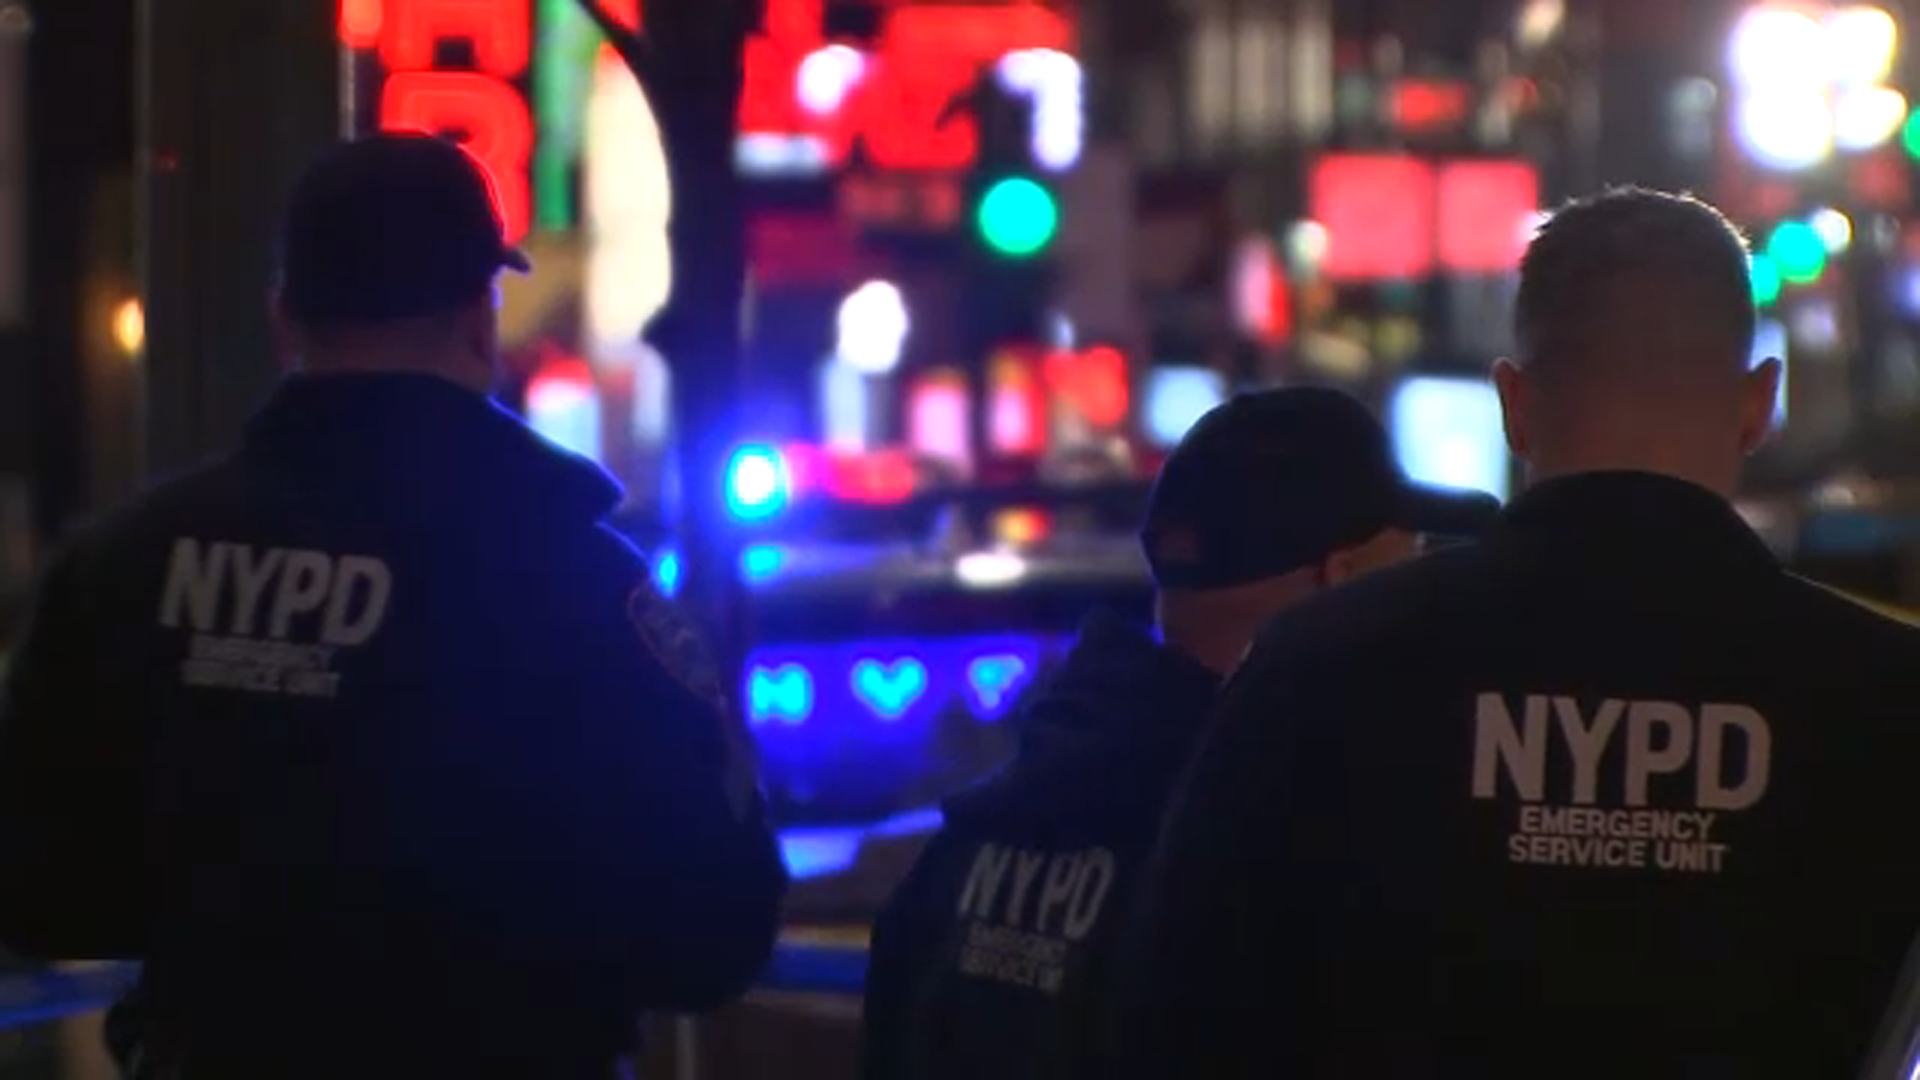 22-year-old man shot near Times Square in New York City has died